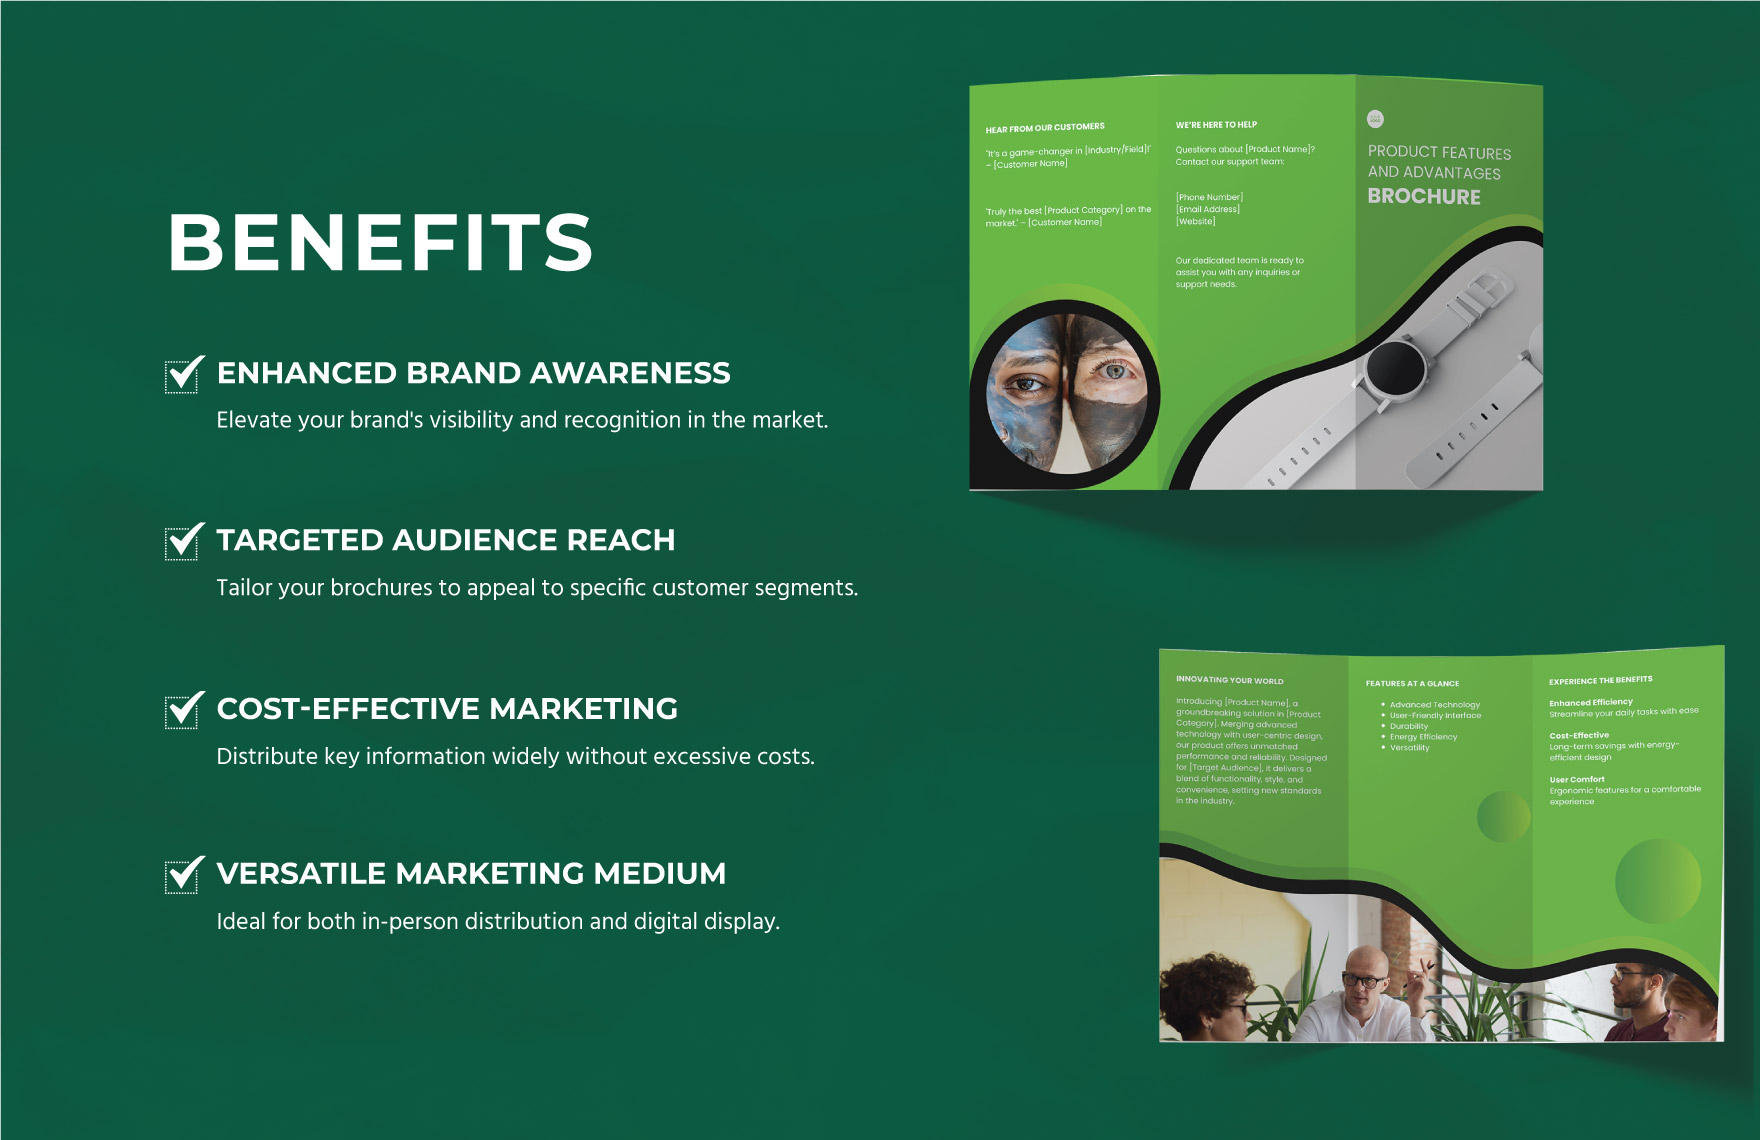 Product Features and Advantages Brochure Template